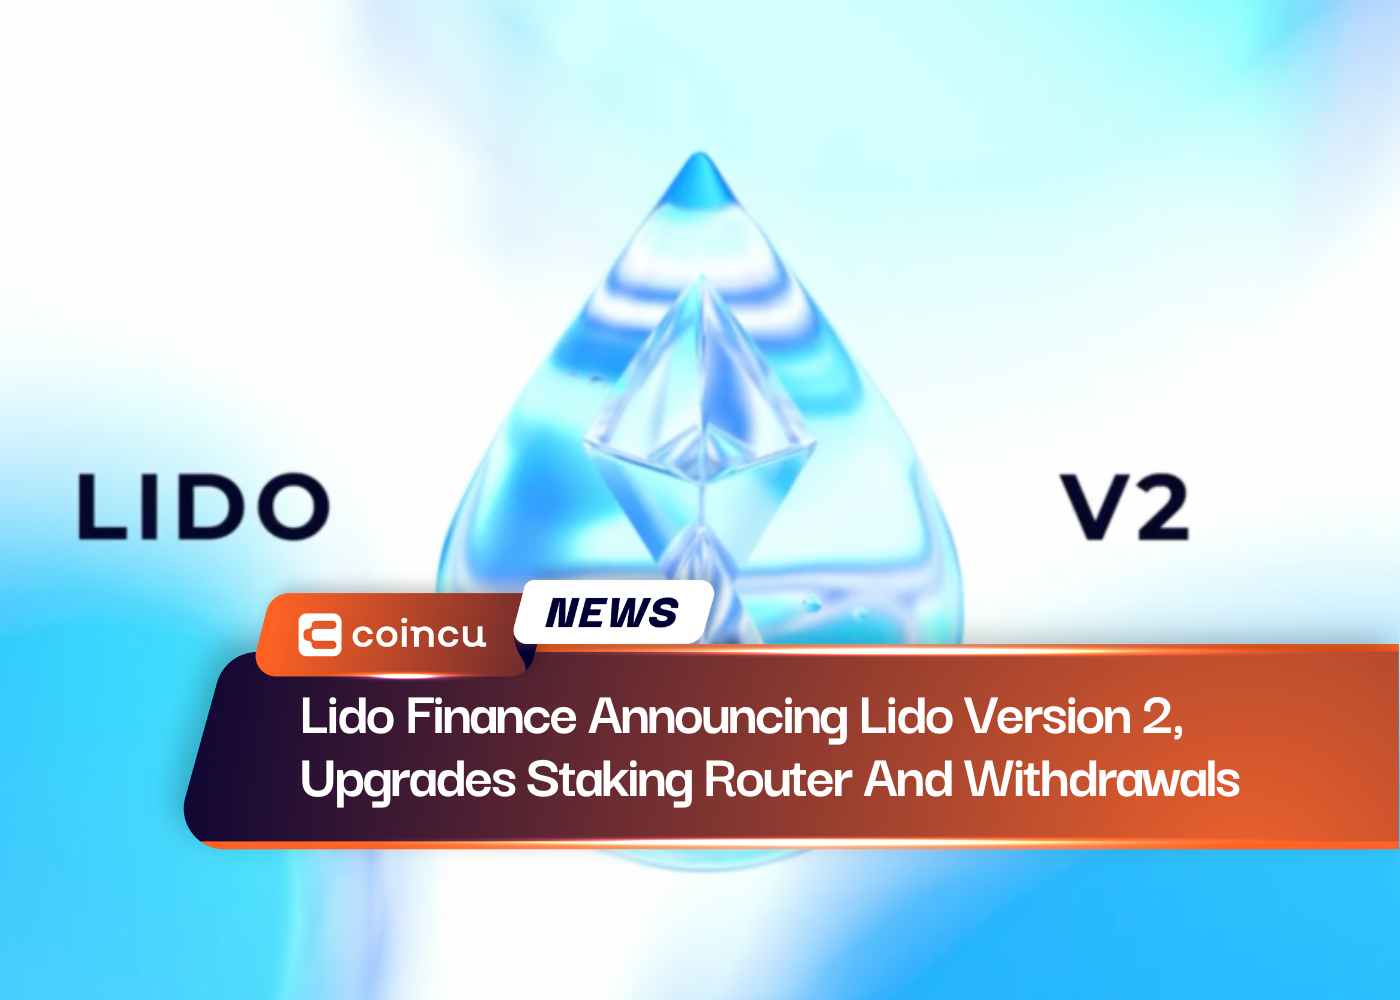 Lido Finance Announcing Lido Version 2, Upgrades Staking Router And Withdrawals